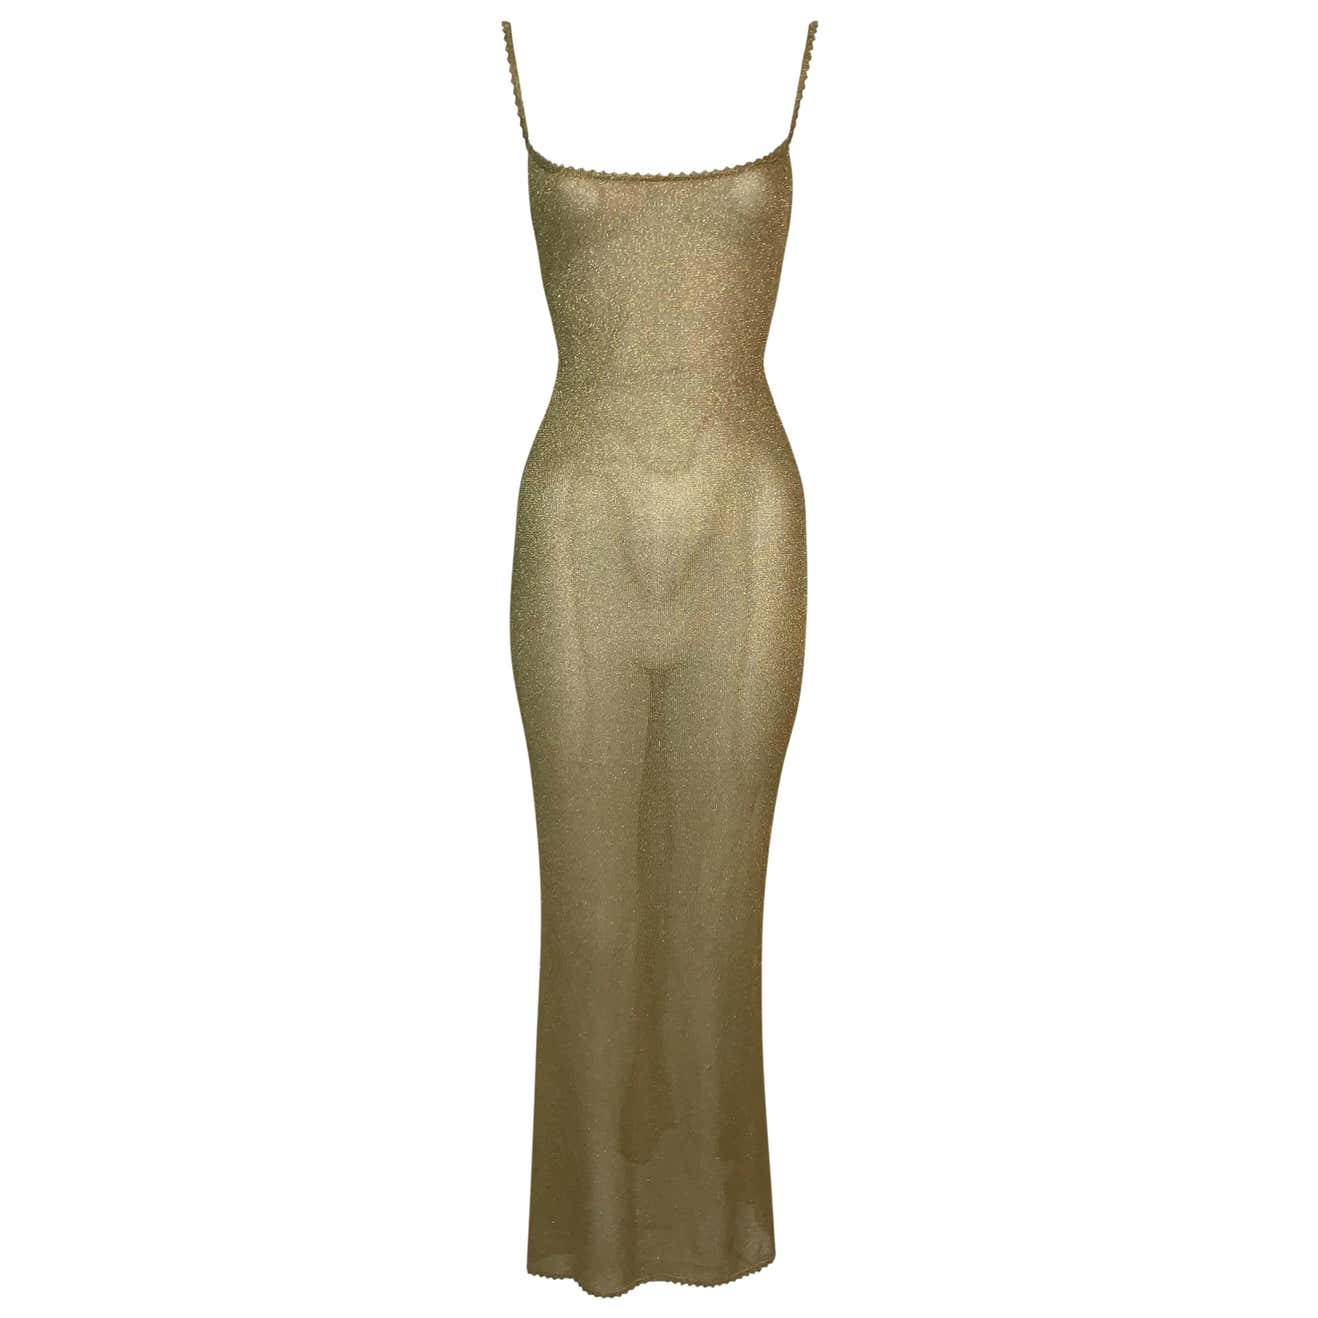 F/W 1999 Christian Dior by John Galliano Sheer Gold Knit Maxi Dress For ...